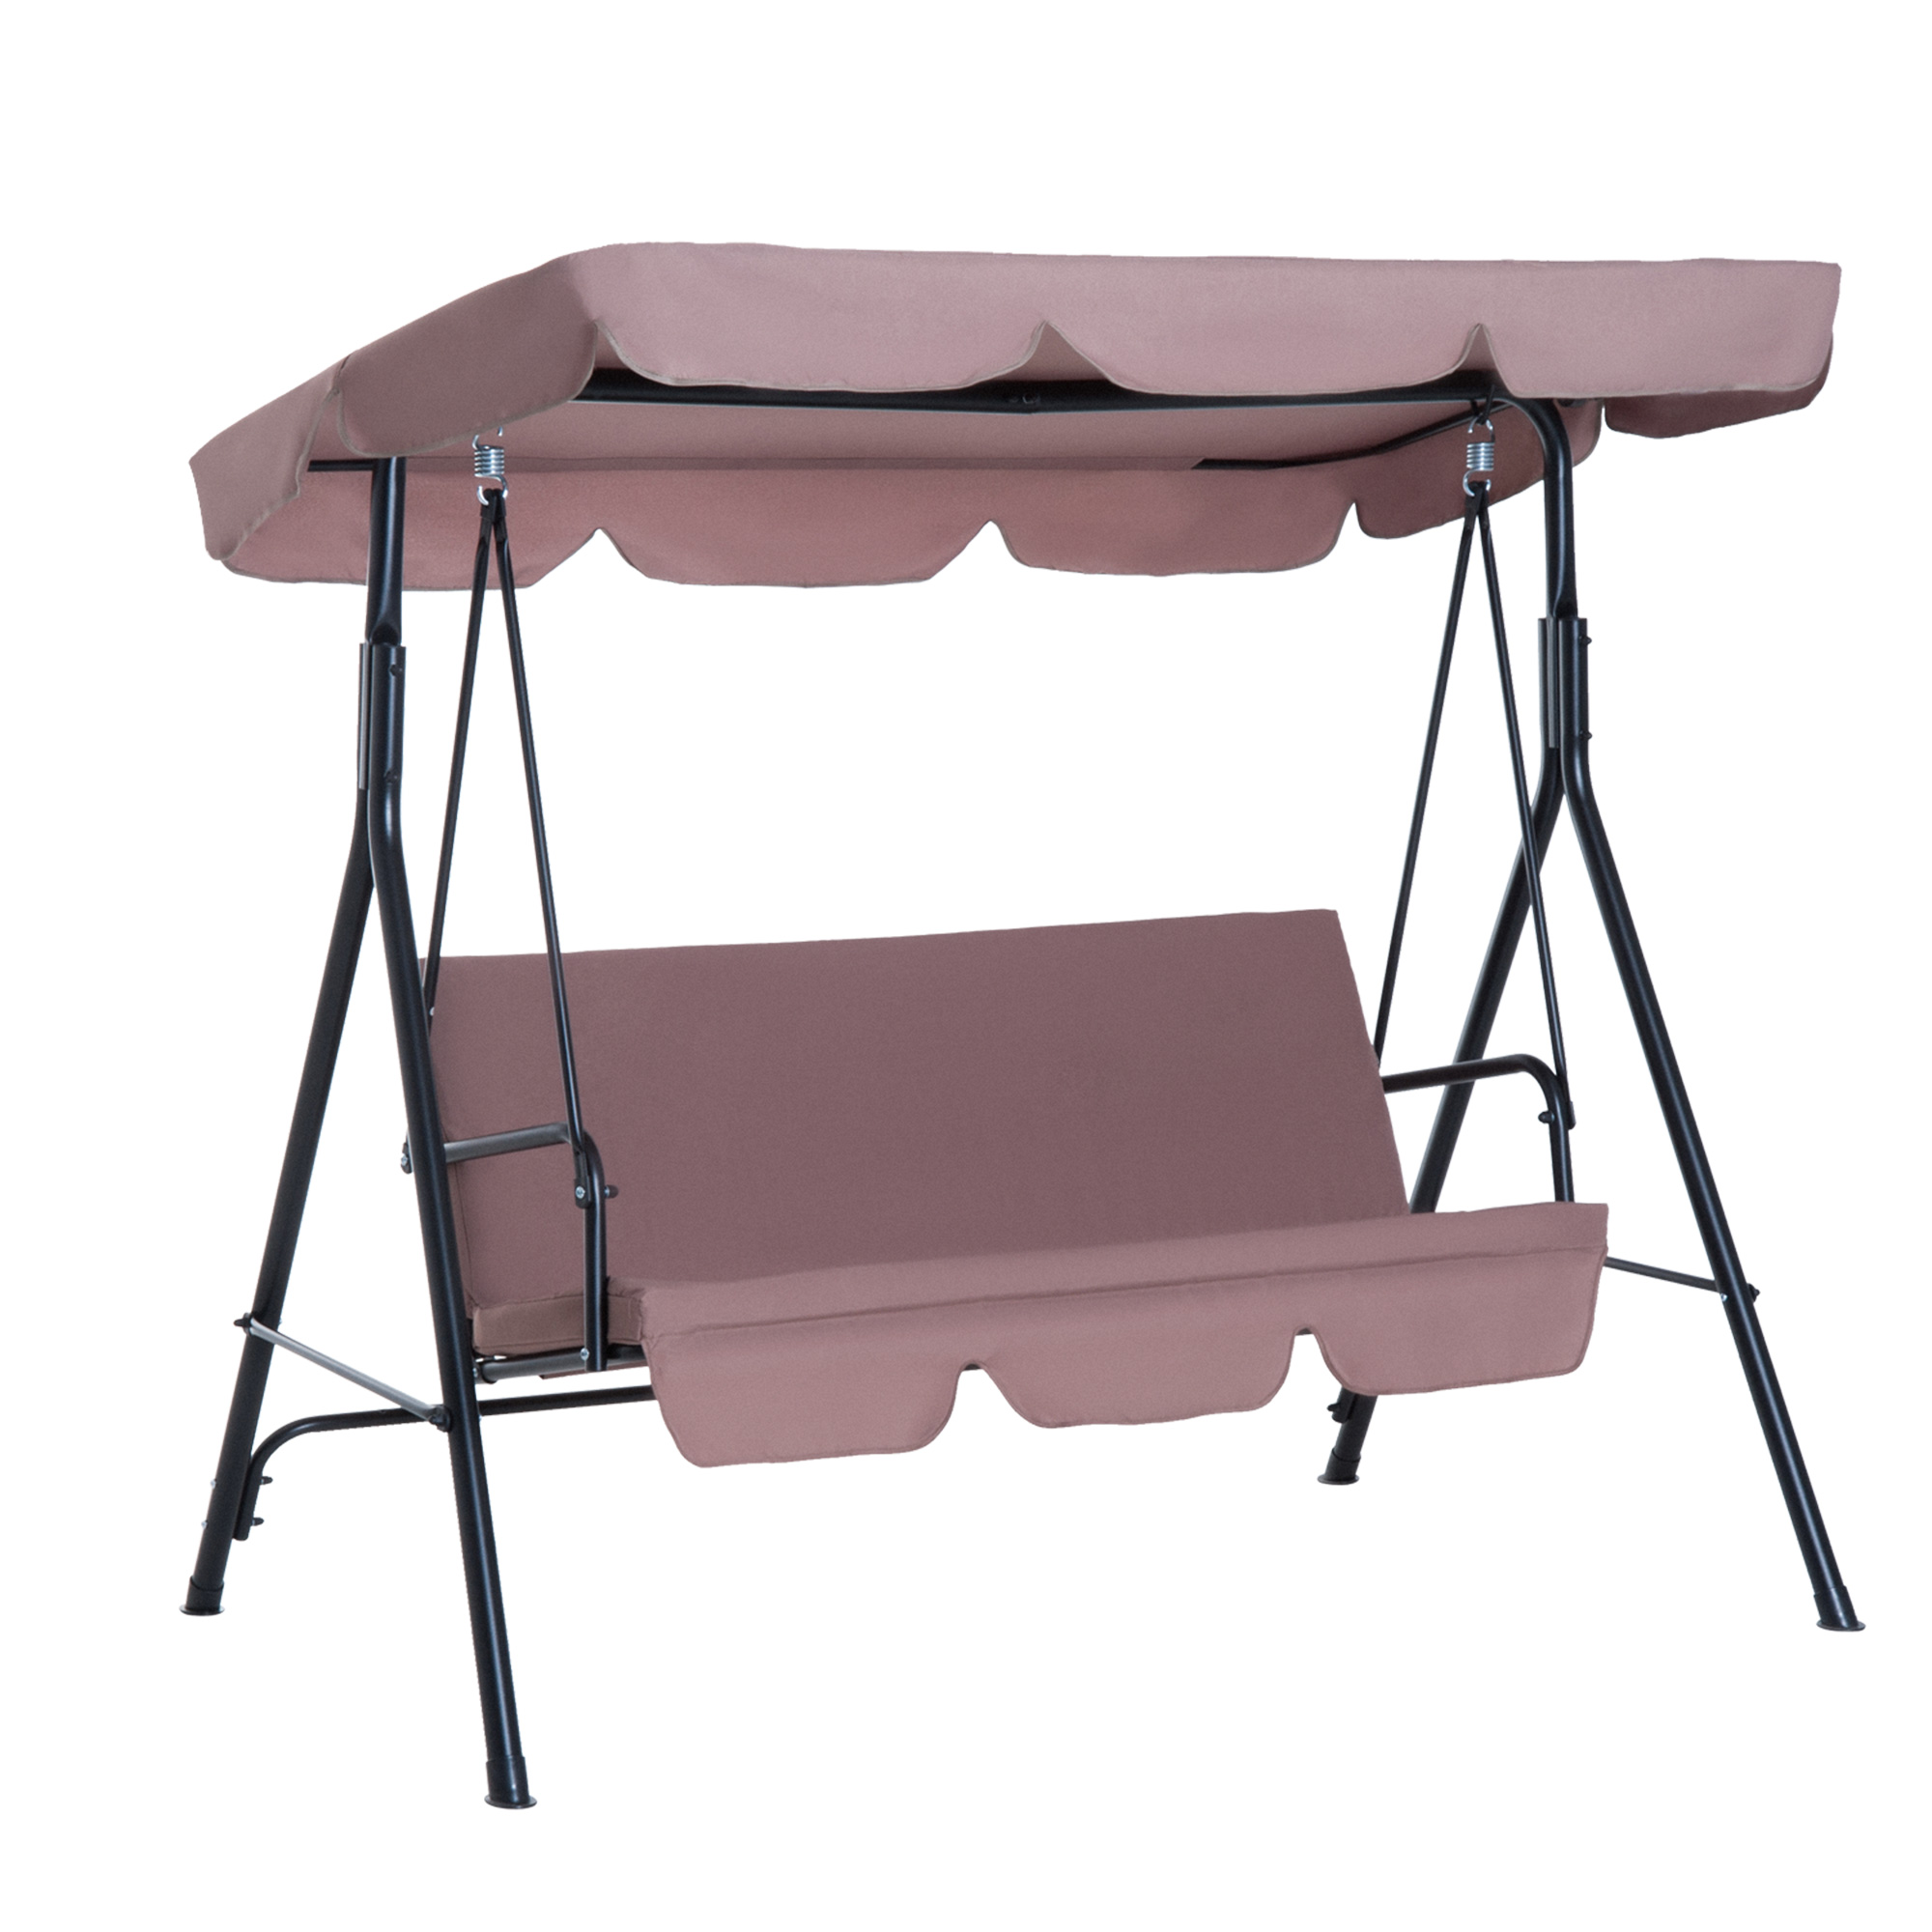 Outsunny 3 Seater Canopy Swing Chair Garden Rocking Bench Heavy Duty Patio Metal Seat W/ Top Roof - Brown